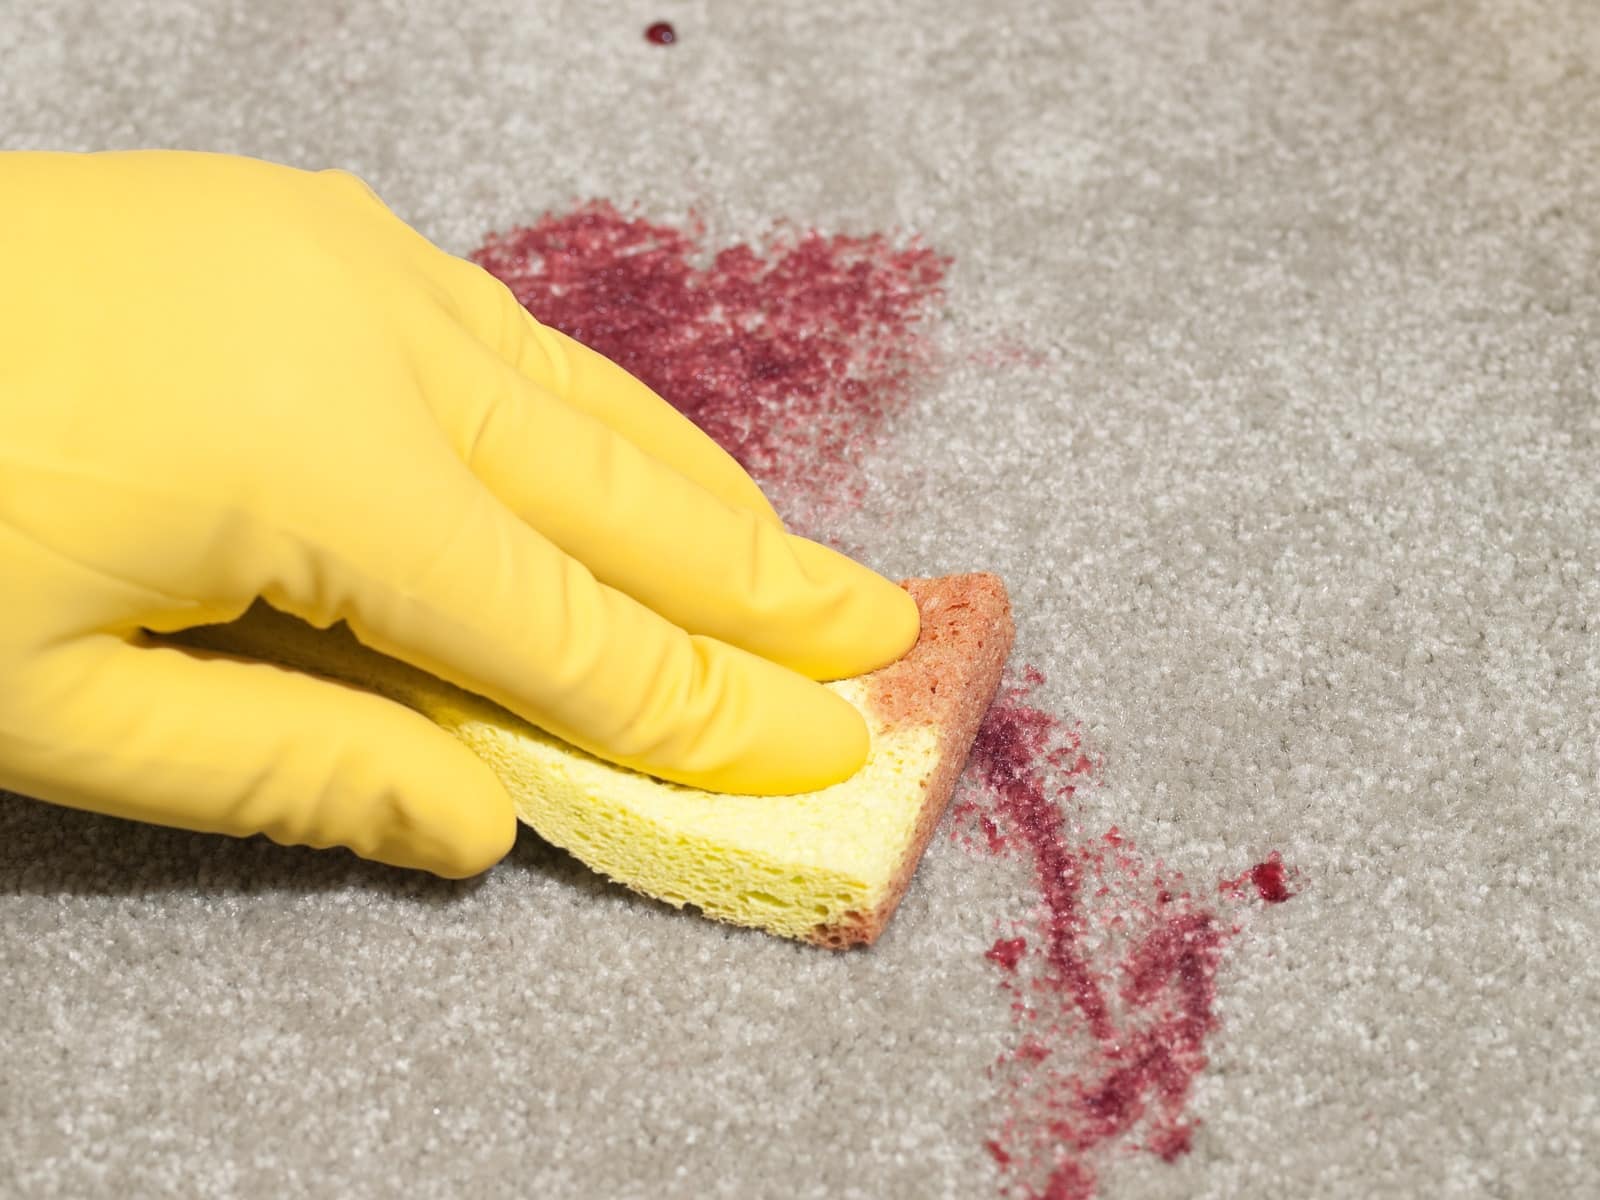 How To Clean Up Blood Stains